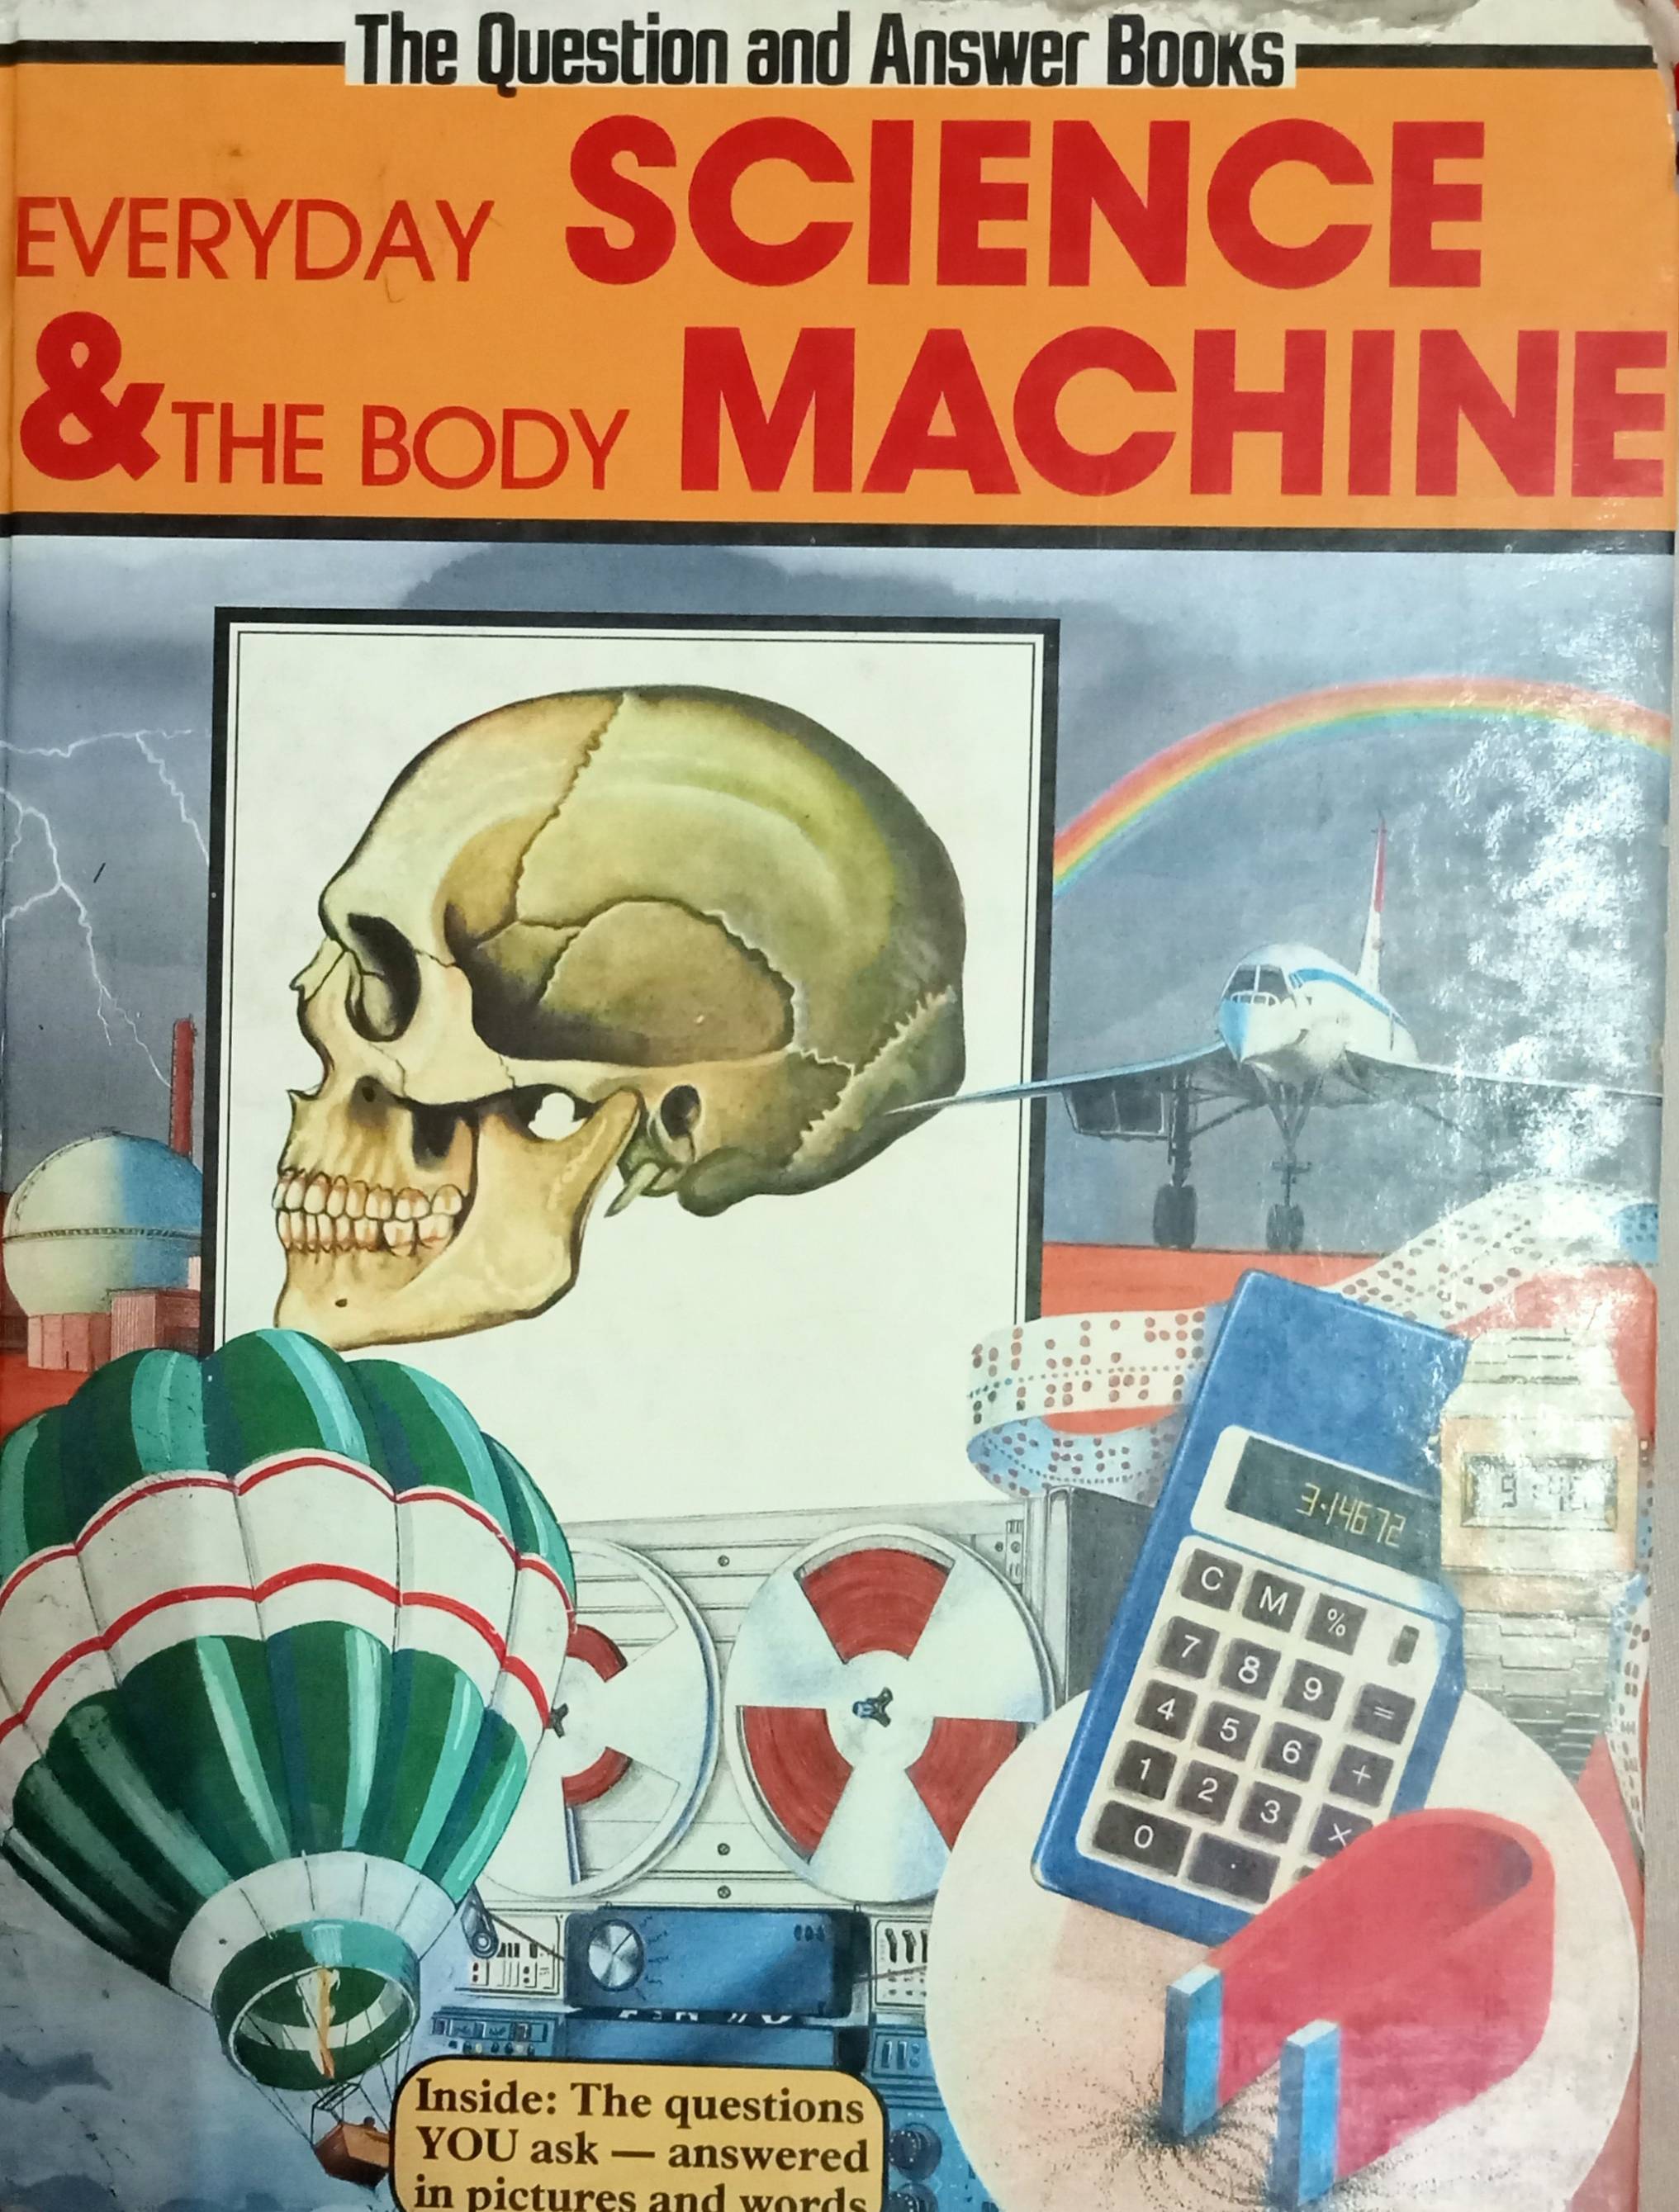 IMG : Everyday Science and the body Machine